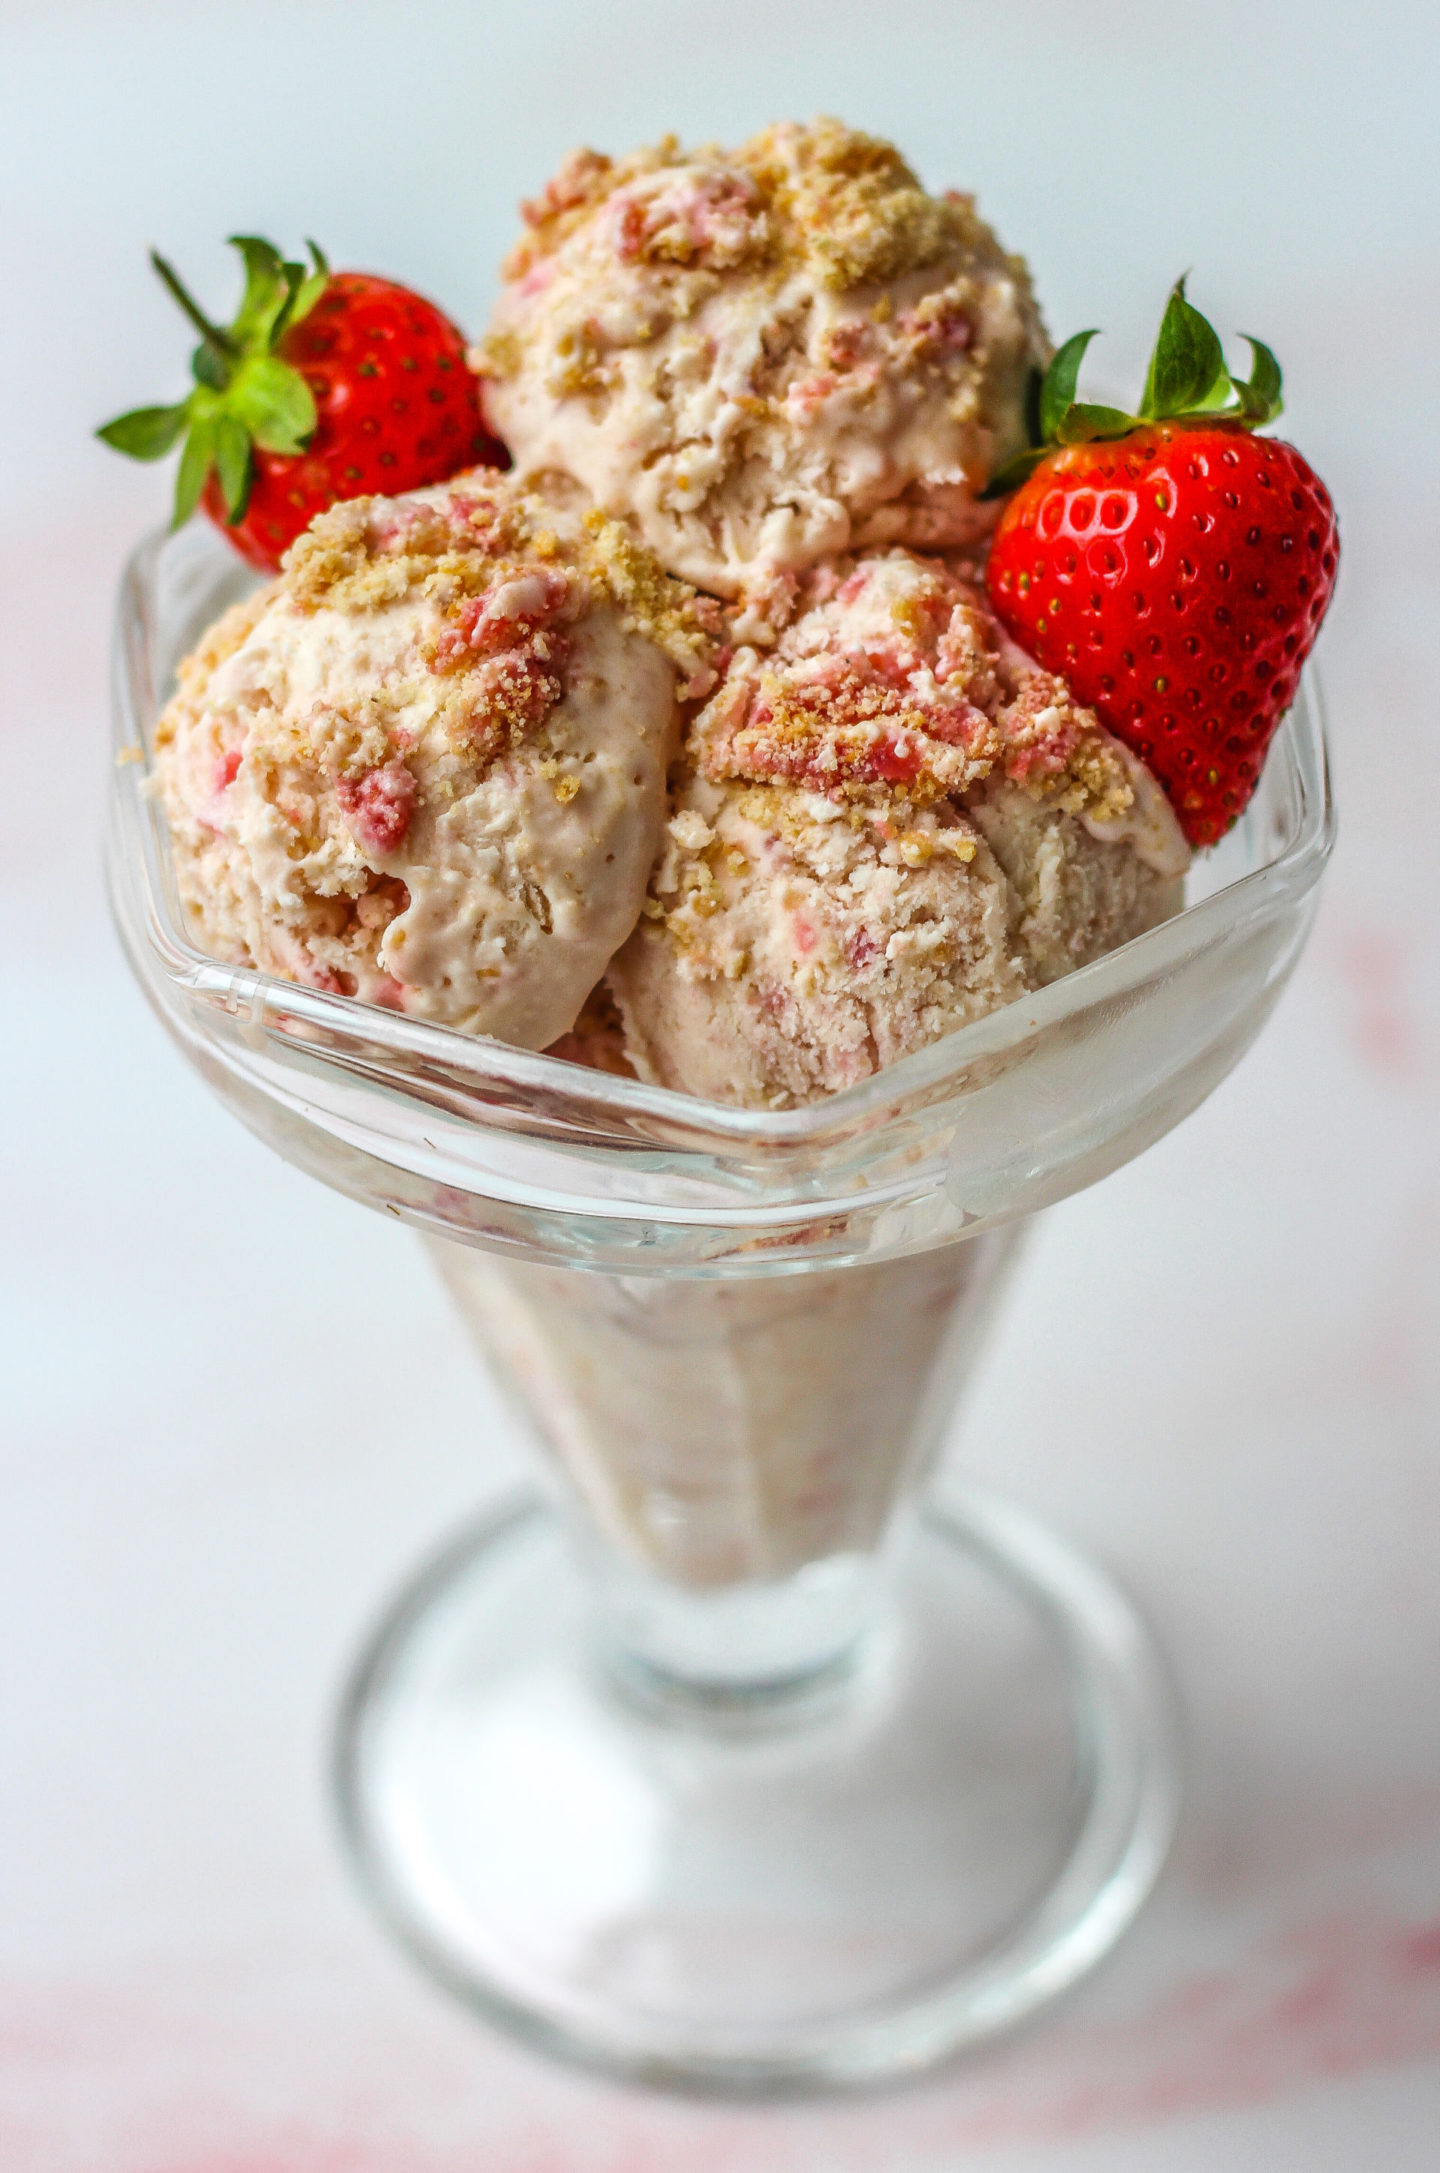 sundae dish filled with homemade no-churn ice cream and decorated with strawberries